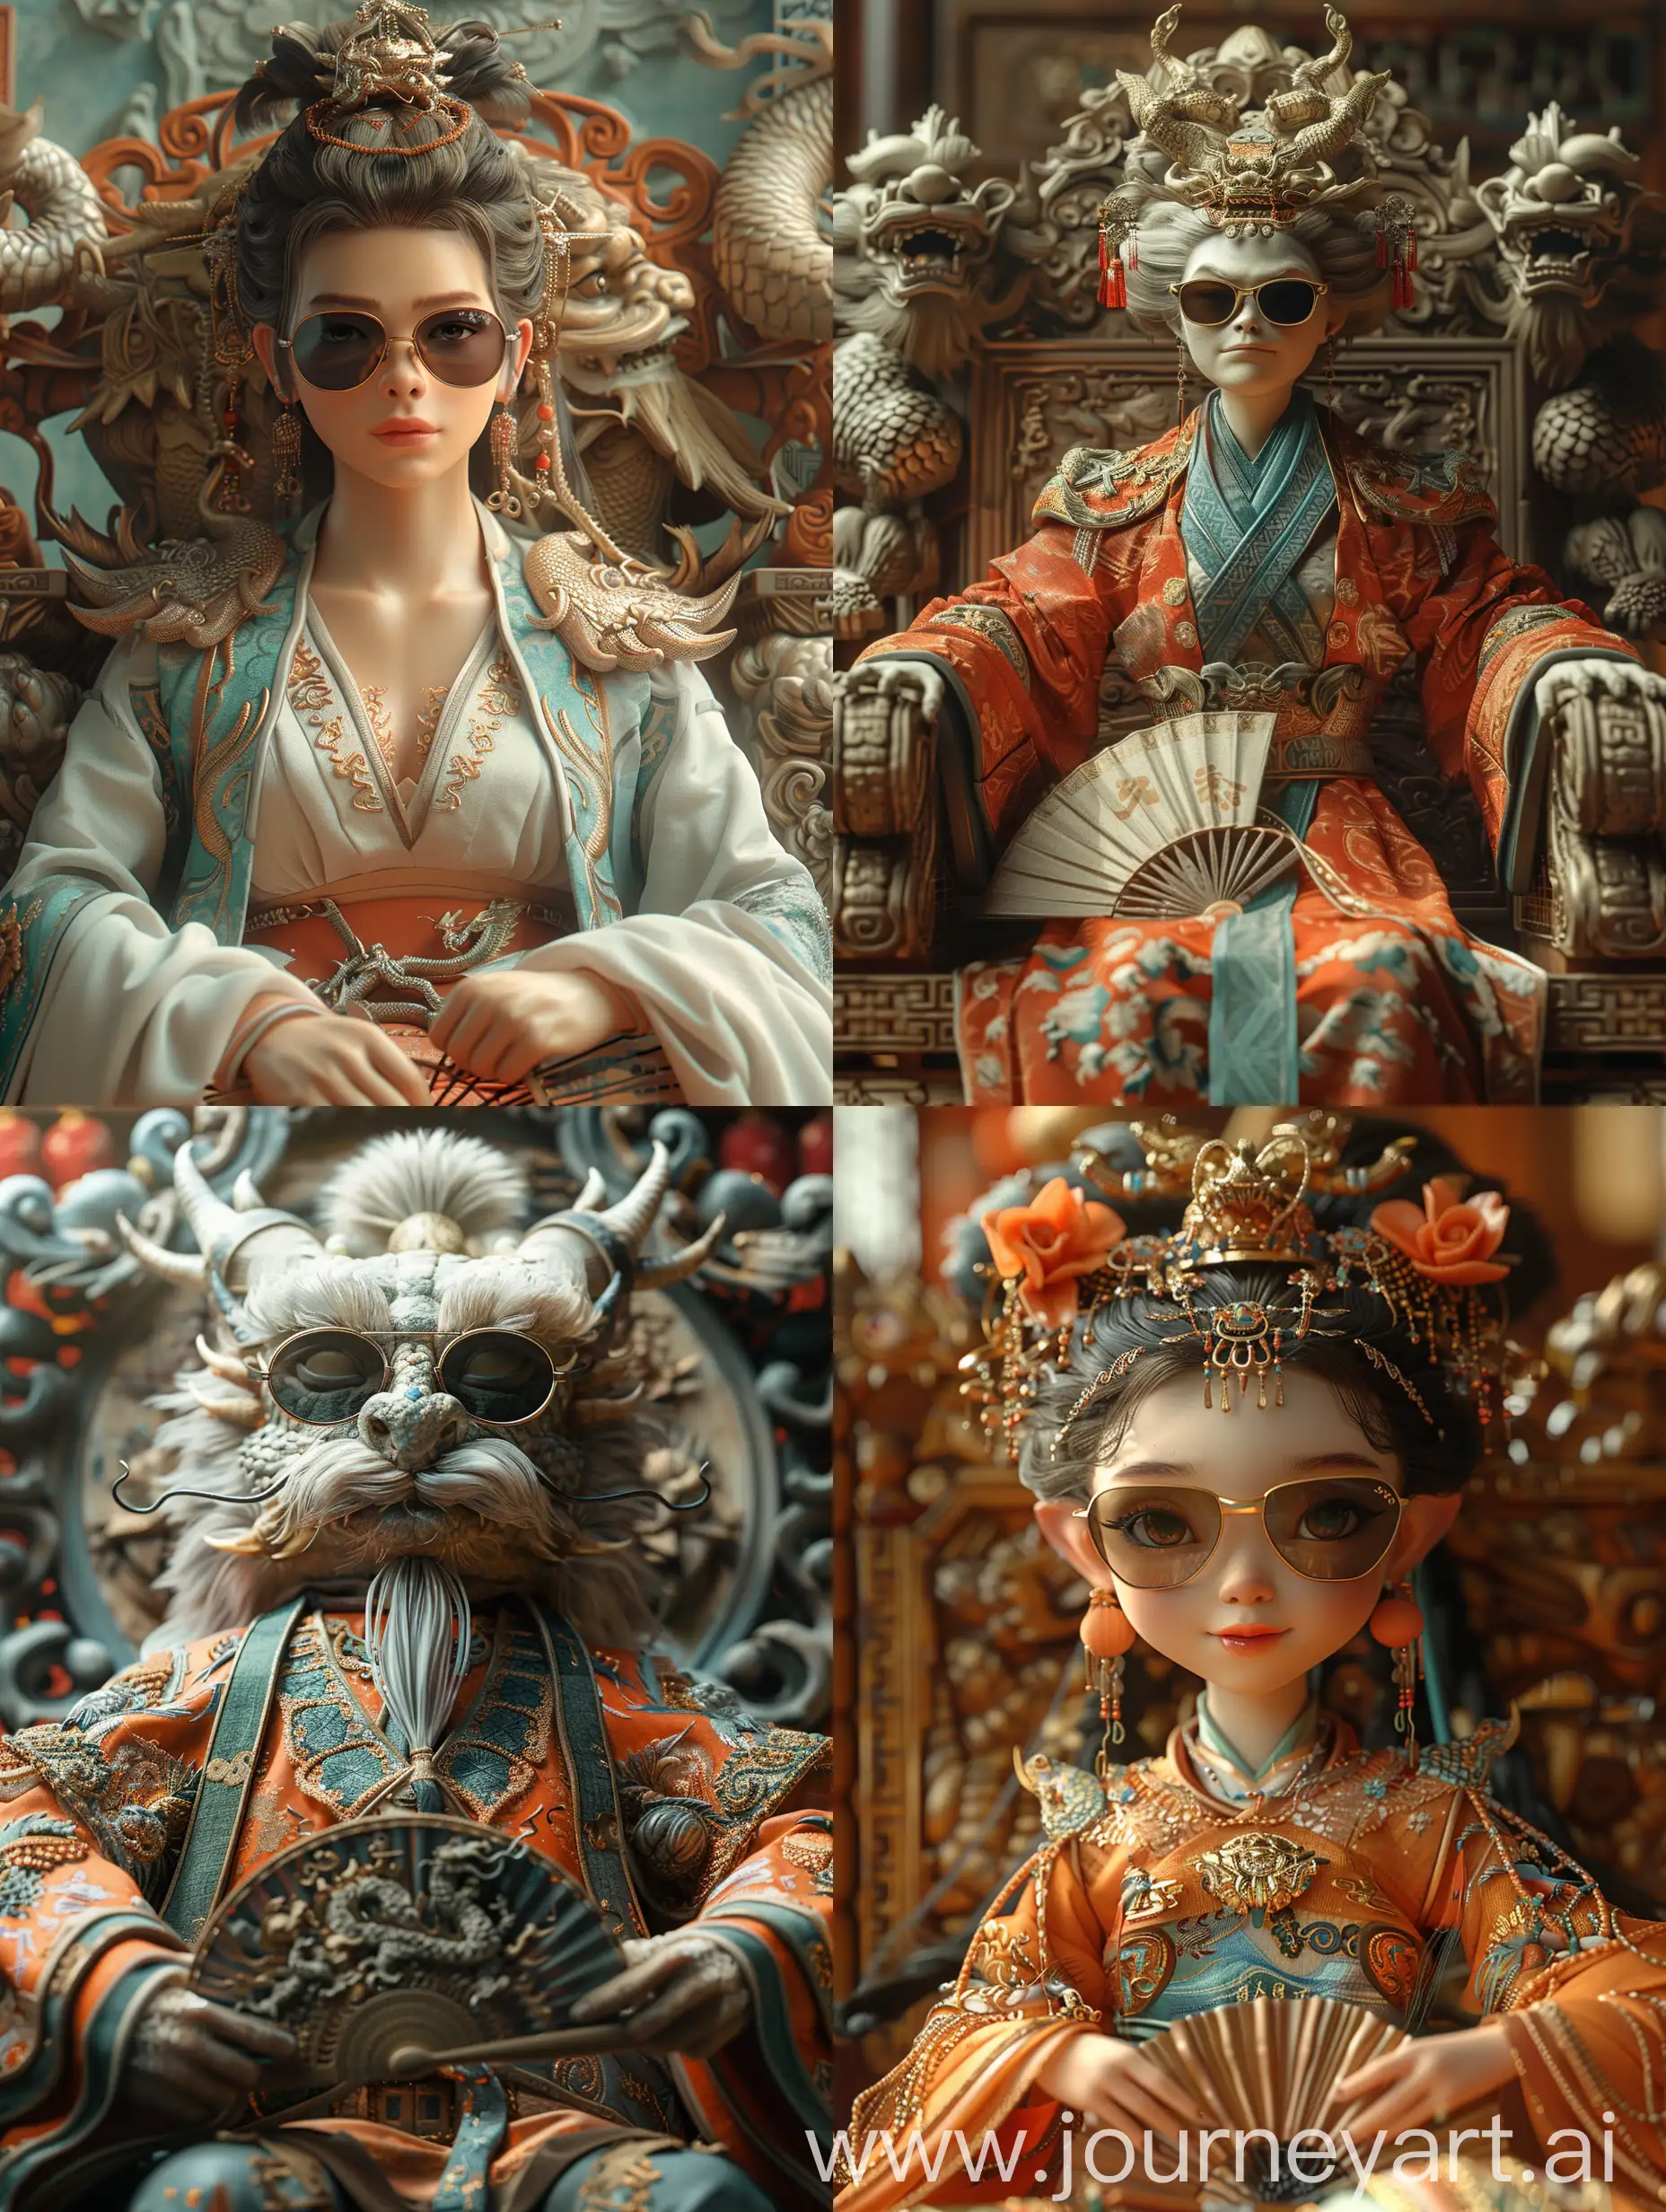 Cool-Humanized-Chinese-Dragon-in-Pixar-Style